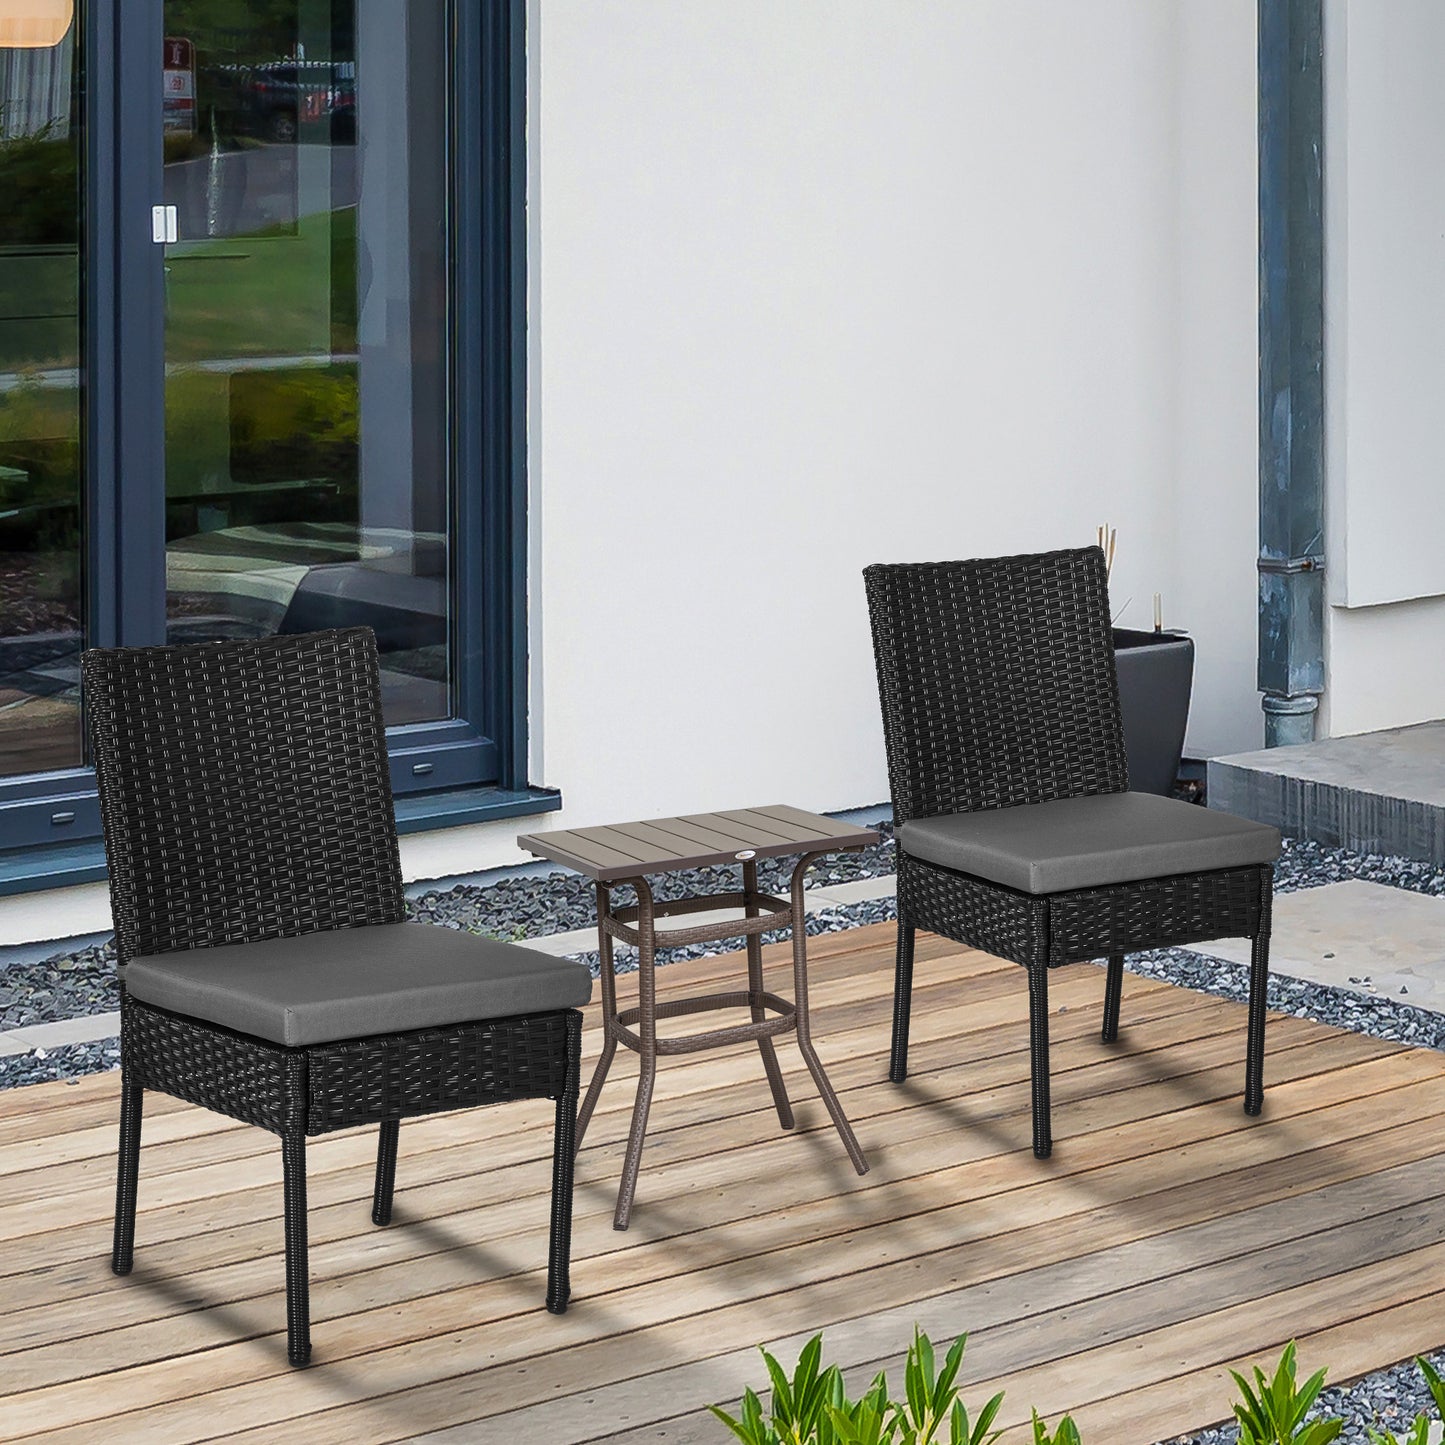 Outsunny Set of Two Armless Rattan Garden Chairs, Stylish and Durable Patio Seating, Elegant Design, Black